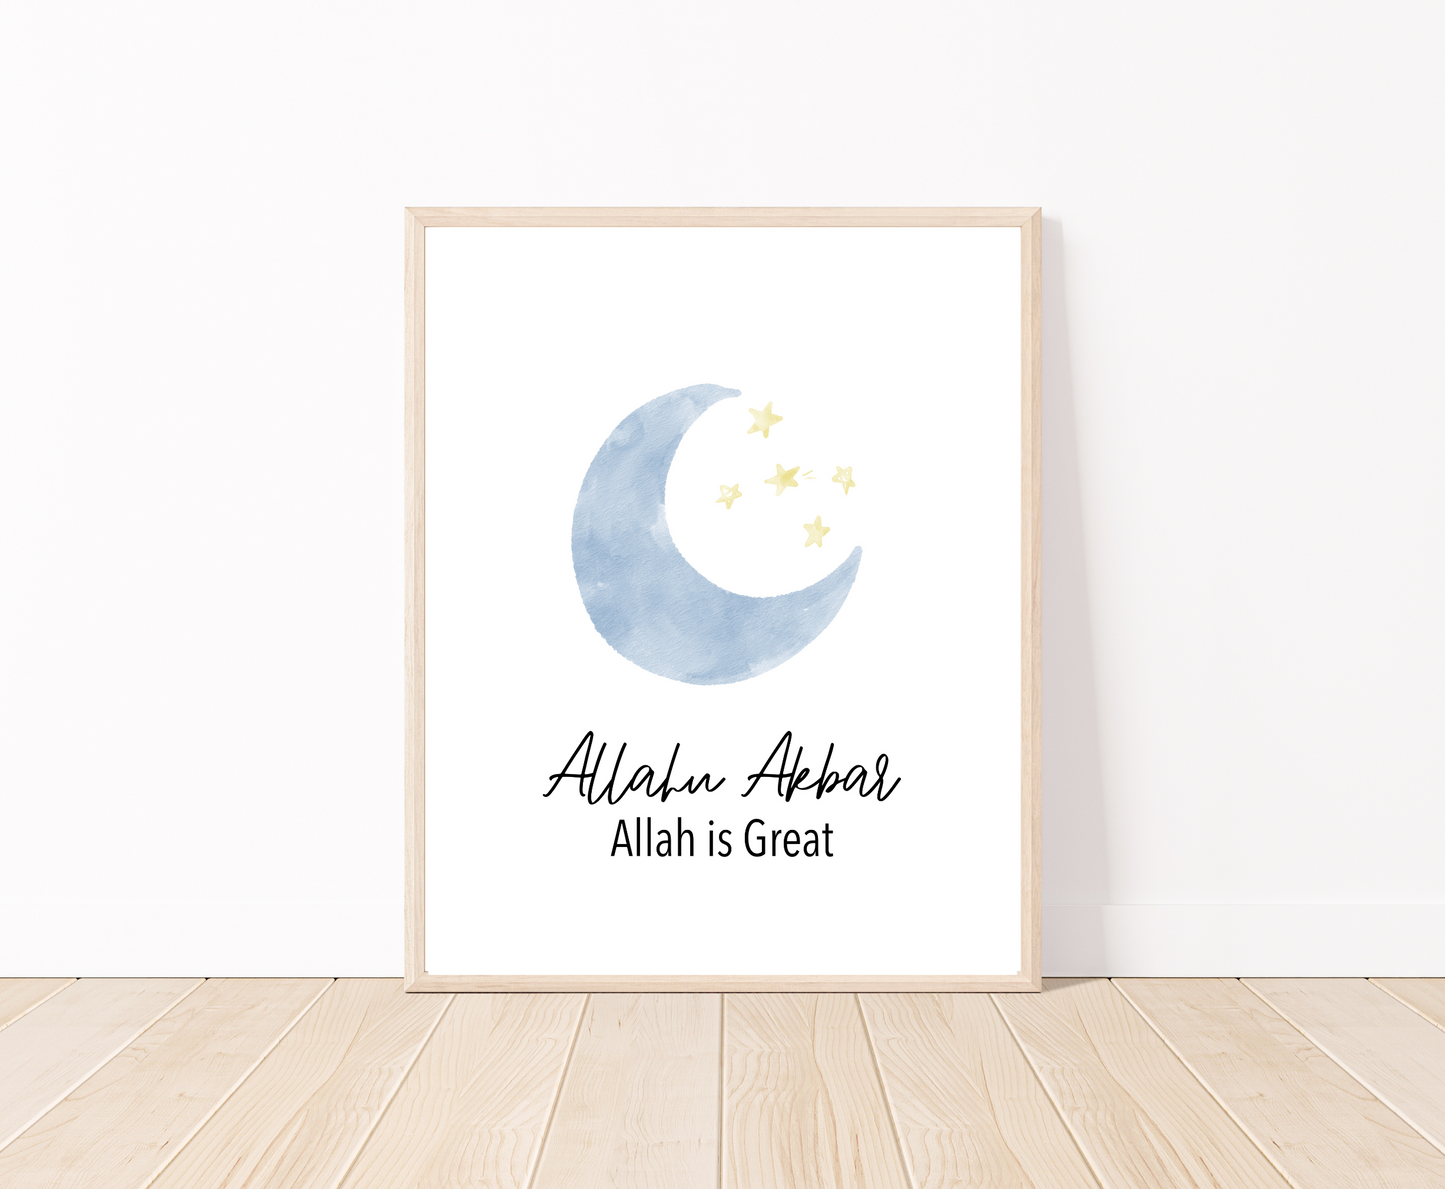 A little boy’s room digital poster that is placed on a white wall and parquet flooring shows a baby blue crescent and tiny yellow stars with the word “Allahu Akbar”, Allah is great, written below.